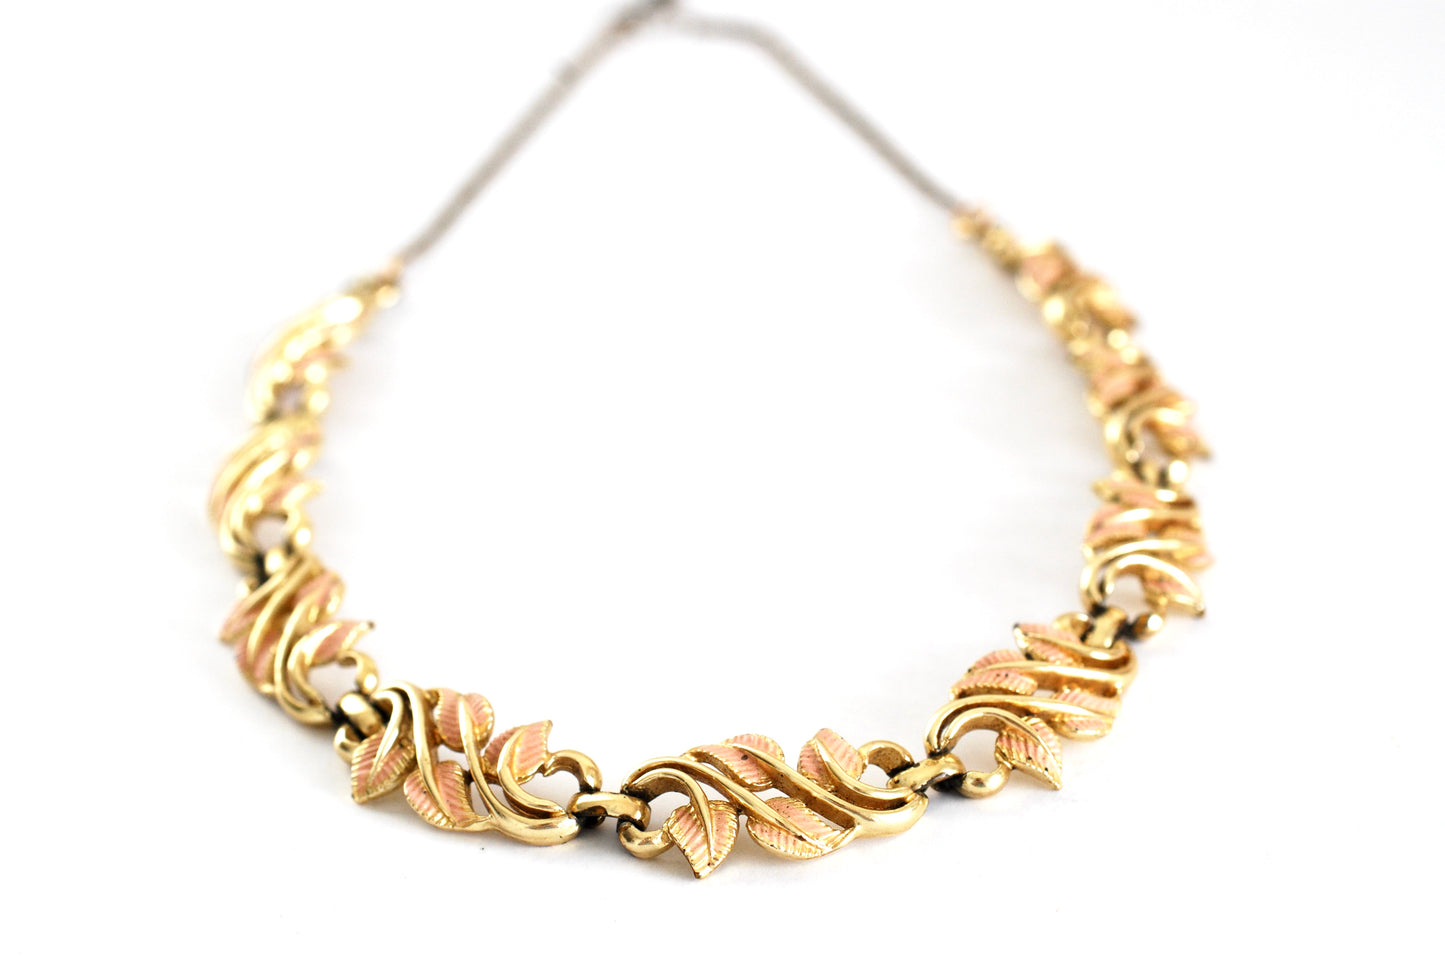 Coro Peach Enameled Leaves Necklace